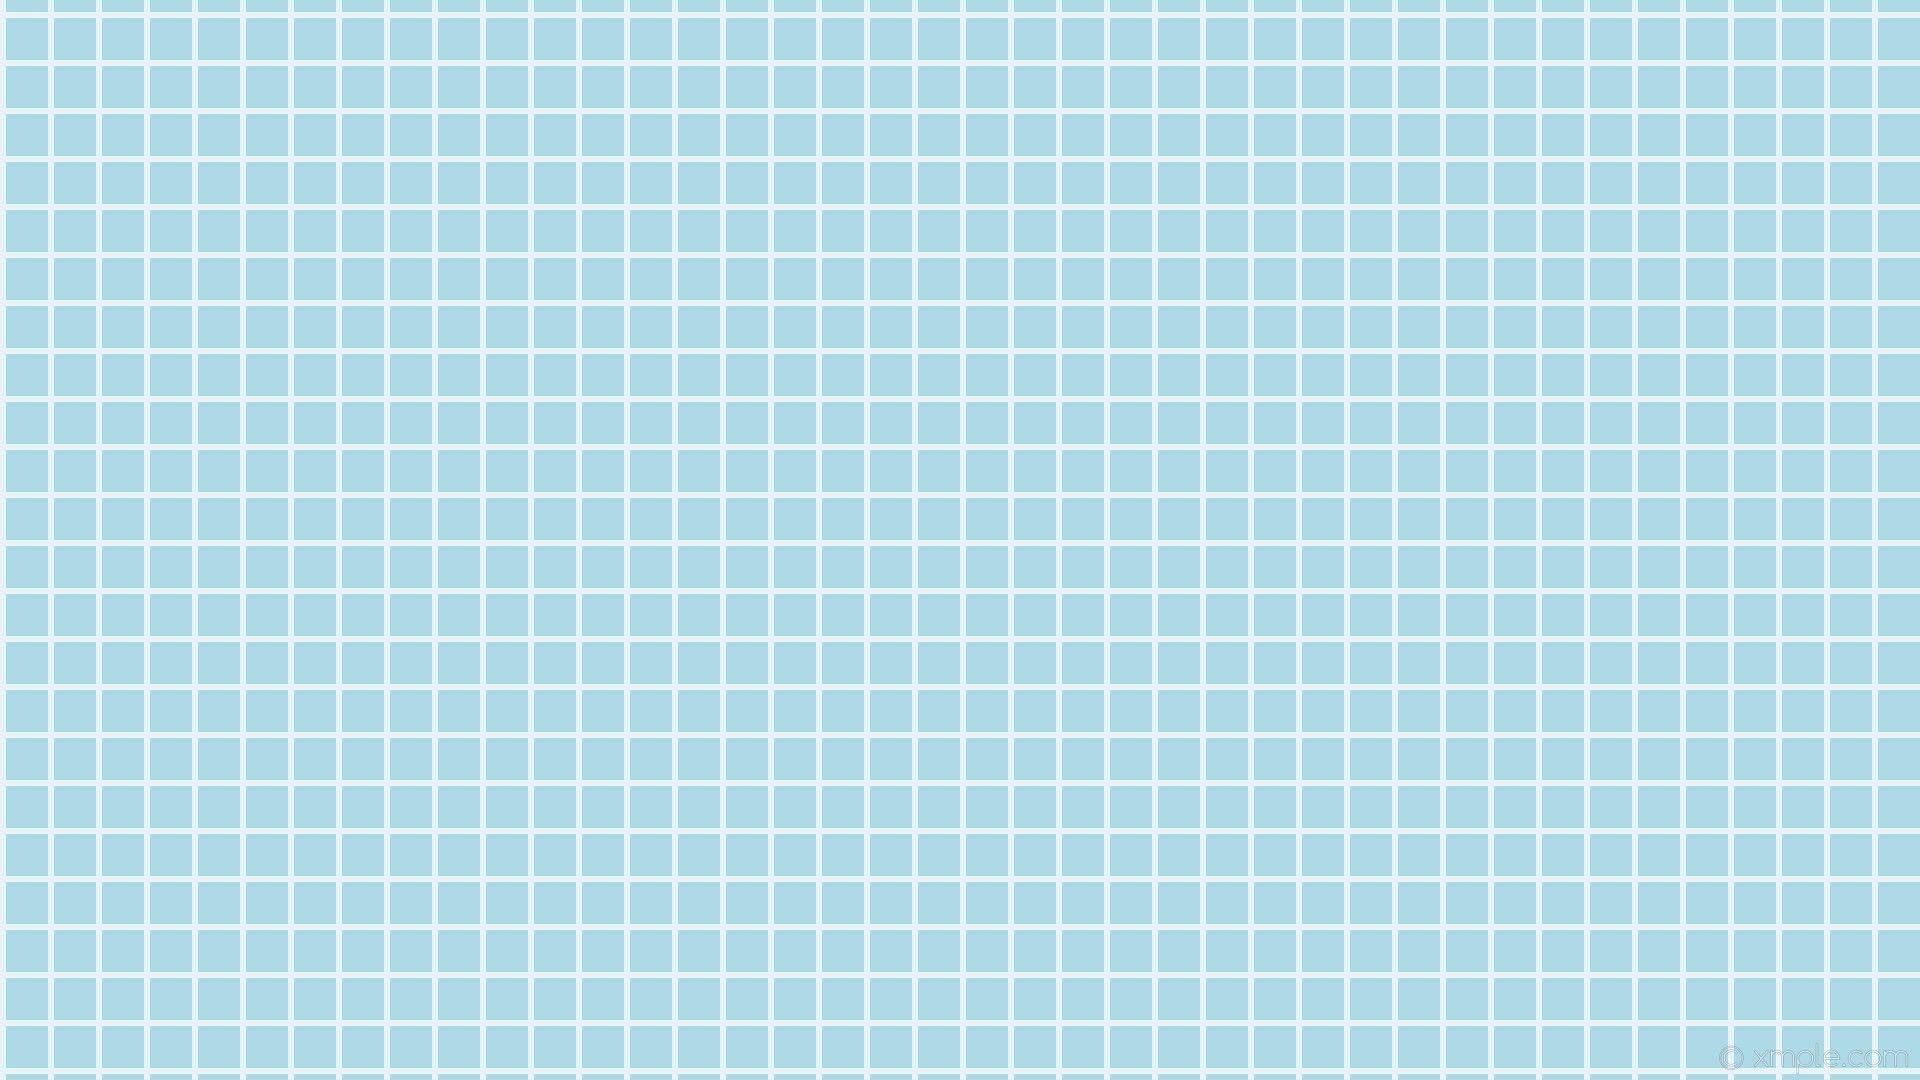 Download Aesthetic Baby Blue Grid Wallpaper | Wallpapers.com